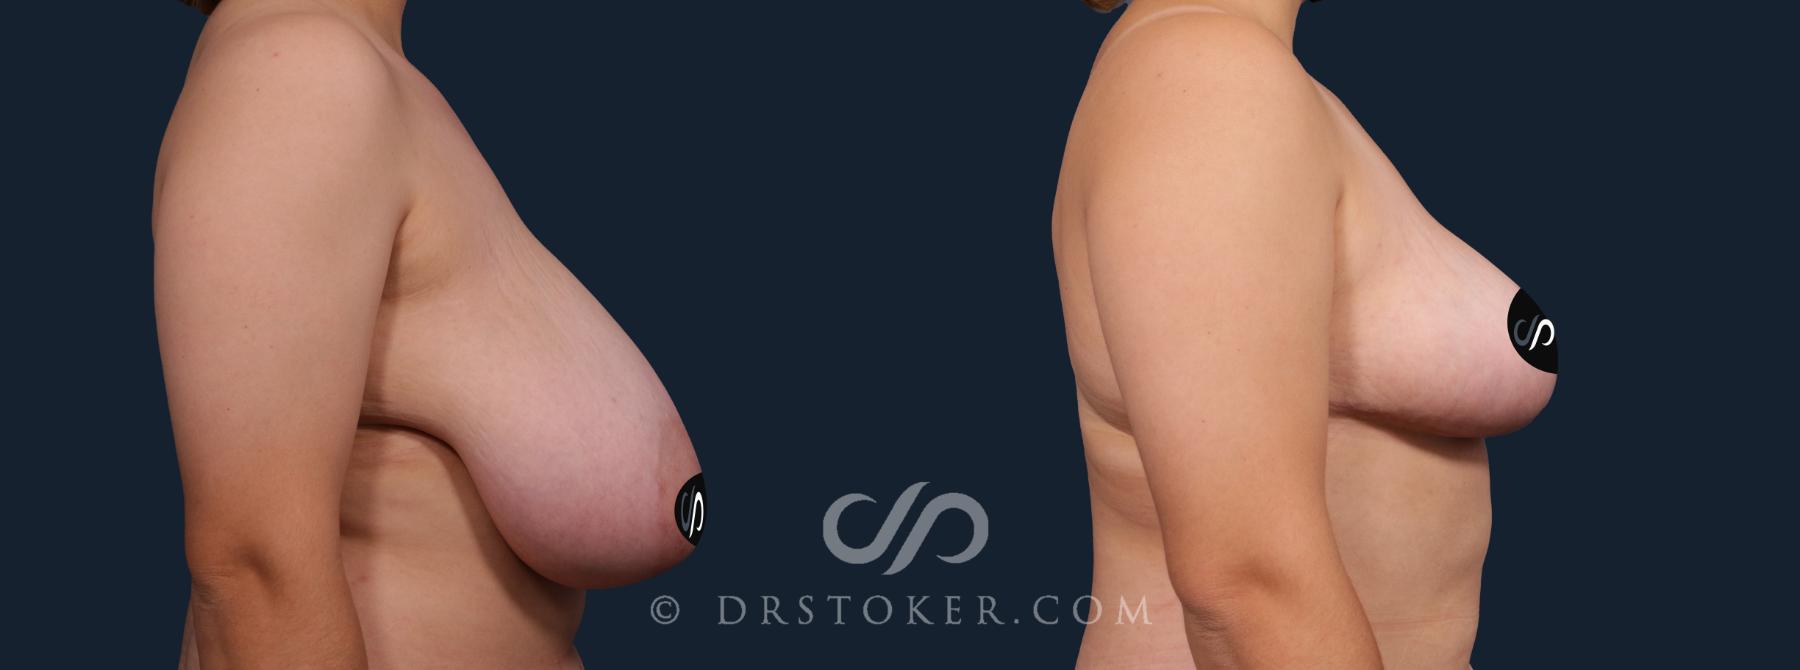 Before & After Breast Reduction (for Women) Case 2105 Right Side View in Los Angeles, CA